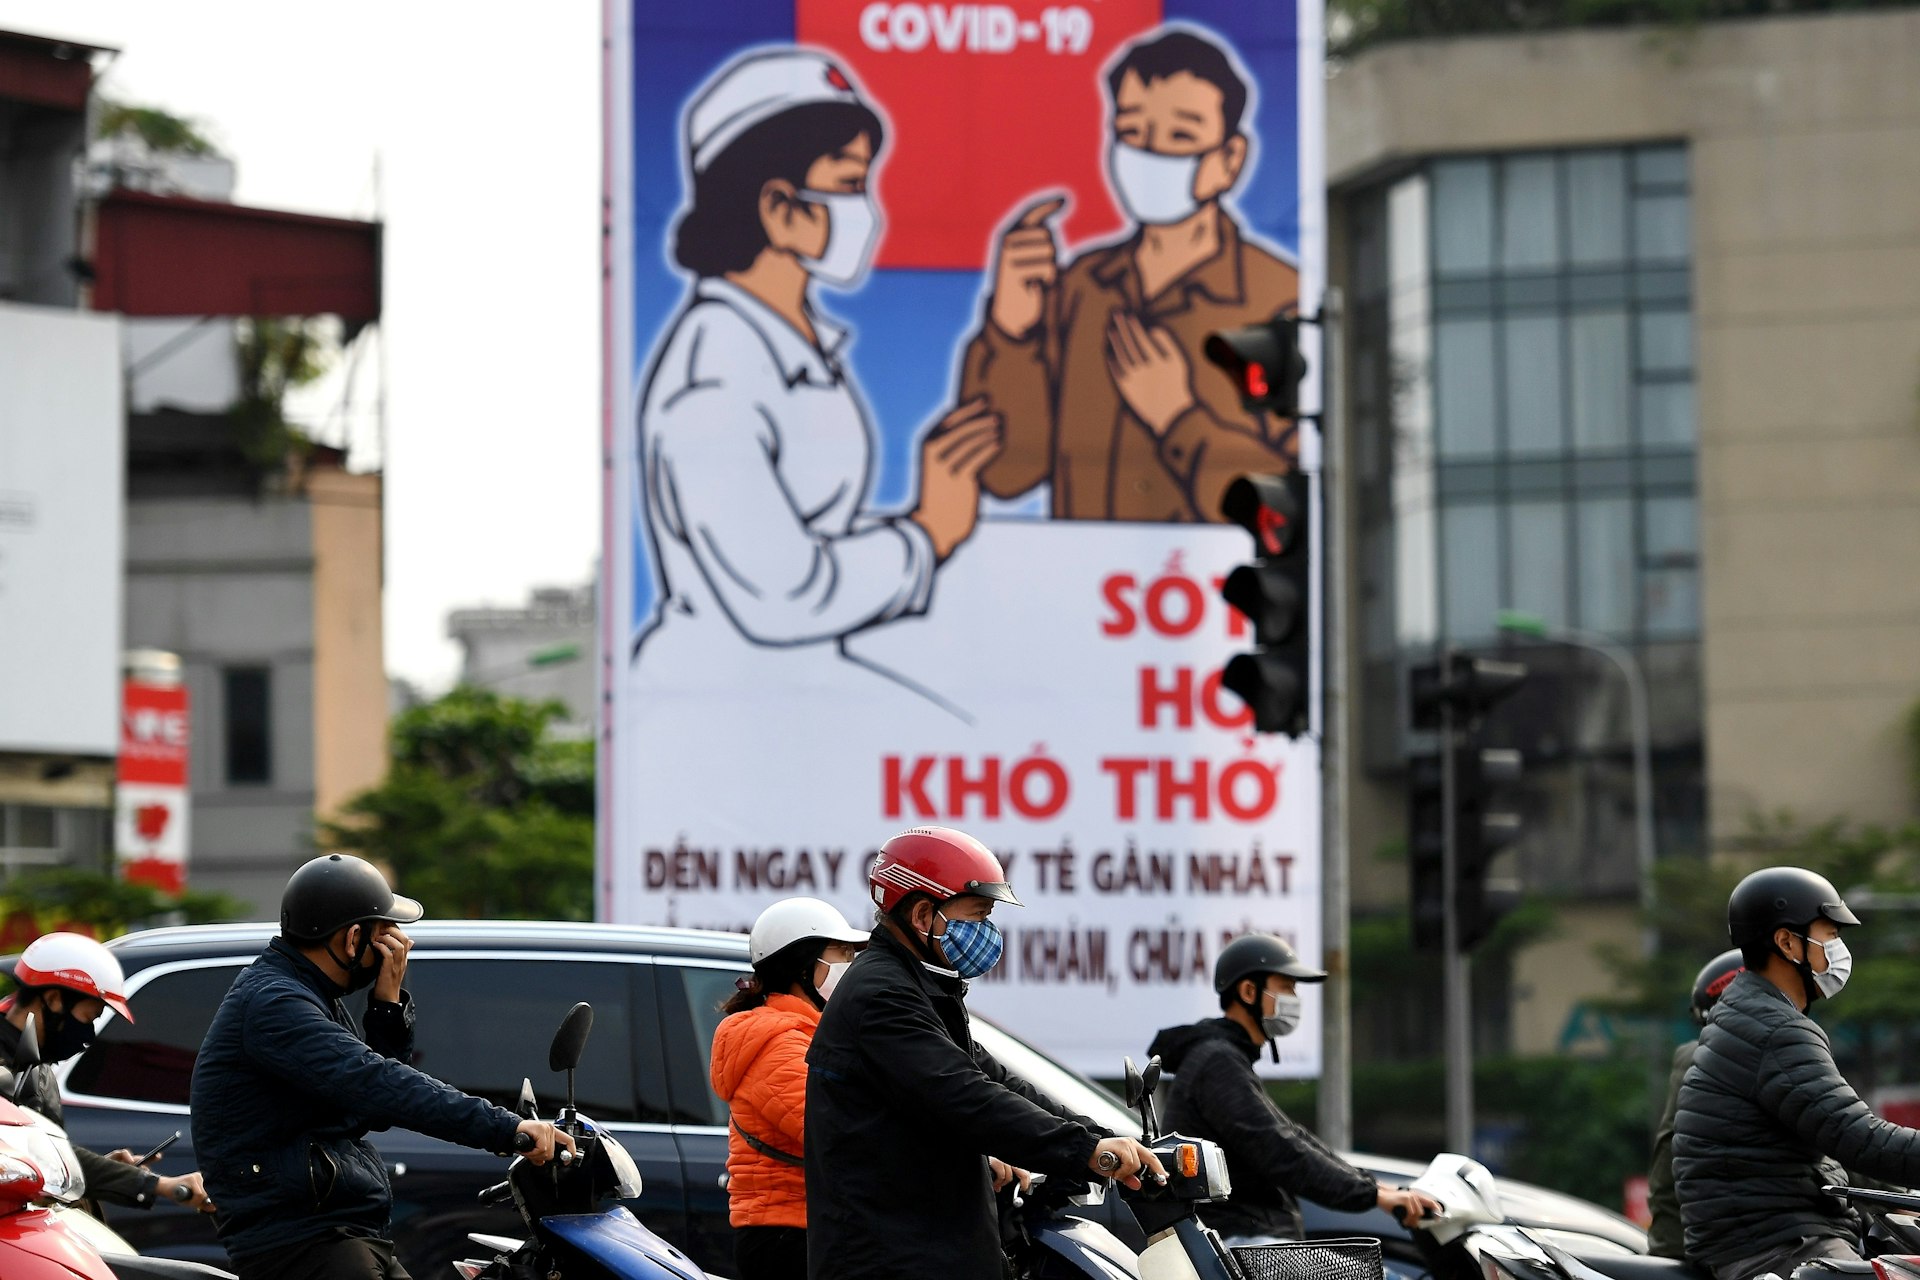 Motorists wearing face masks wait at a traffic light amid Vietnam's nationwide social isolation effort as a preventive measure against the spread of COVID-19 coronavirus in Hanoi on April 6, 2020.